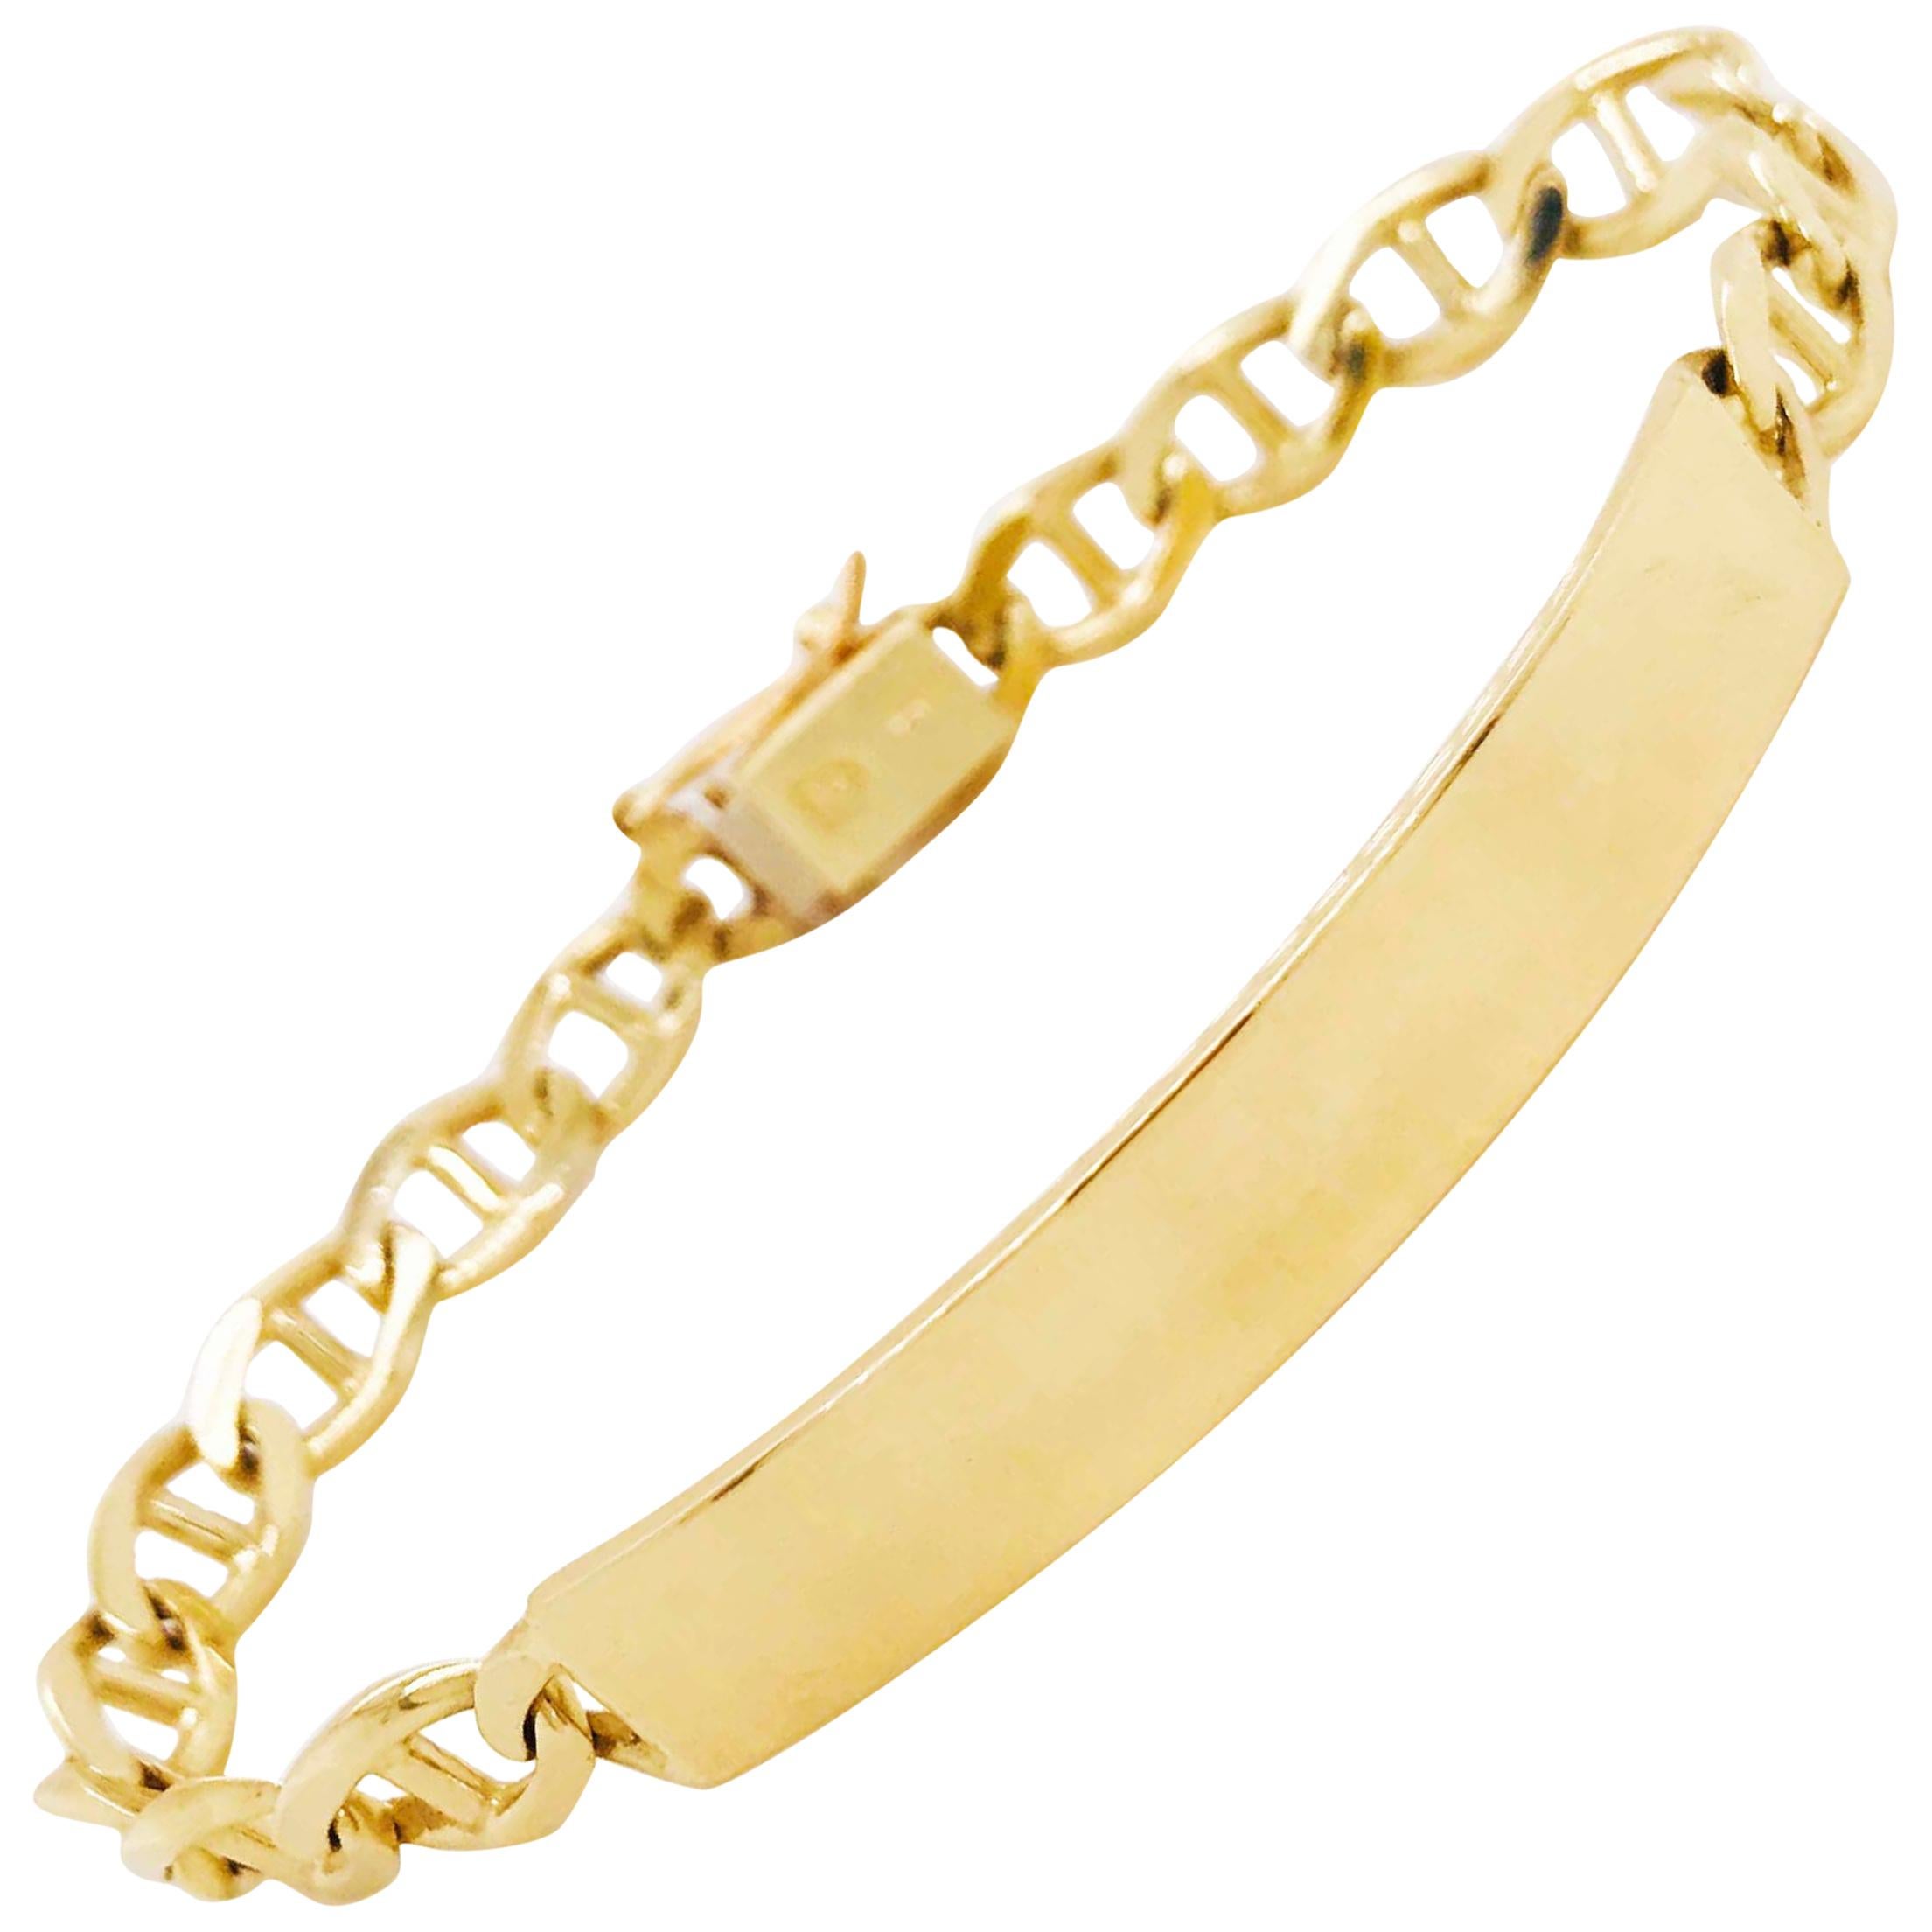 Youth Adult Lengths Customized 5mm Wide Anchor Chain Bracelet Jewellery Bracelets ID & Medical Bracelets Personally Engraved Solid 14K Yellow Gold ID Bracelet Made in USA 